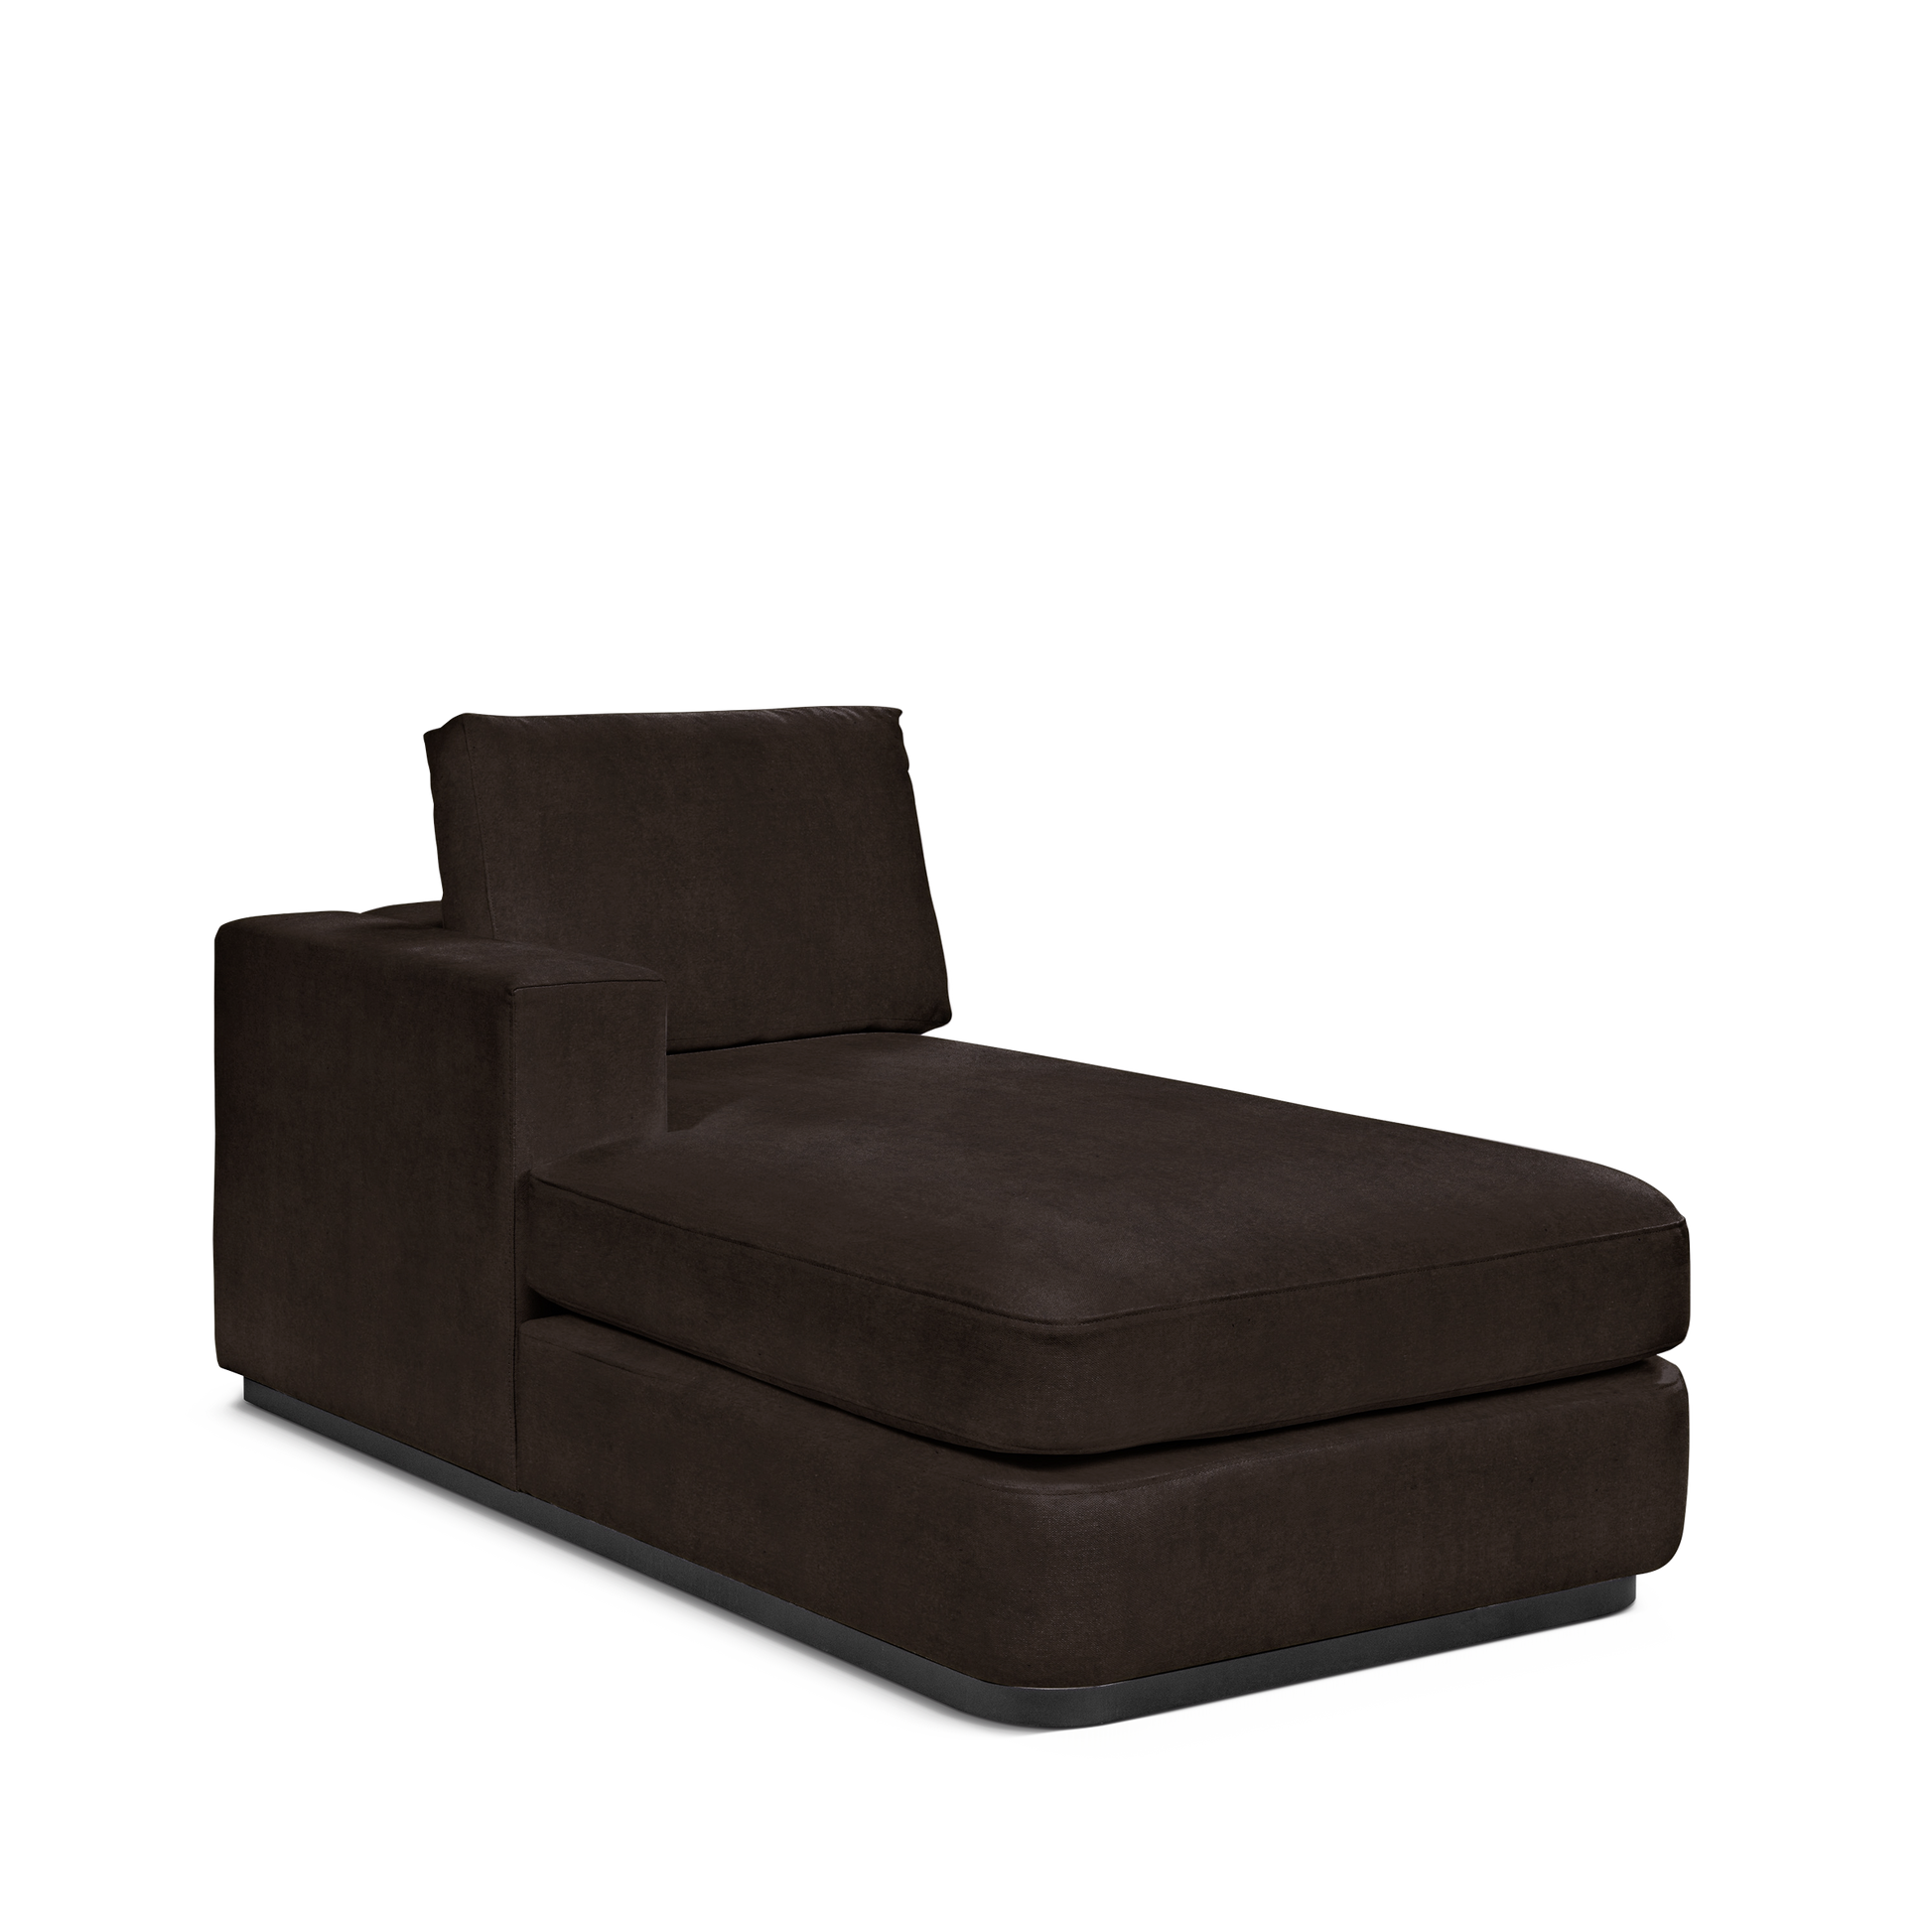 ATLAS 90 Lounge Bed arm rest left with dark brown textile 